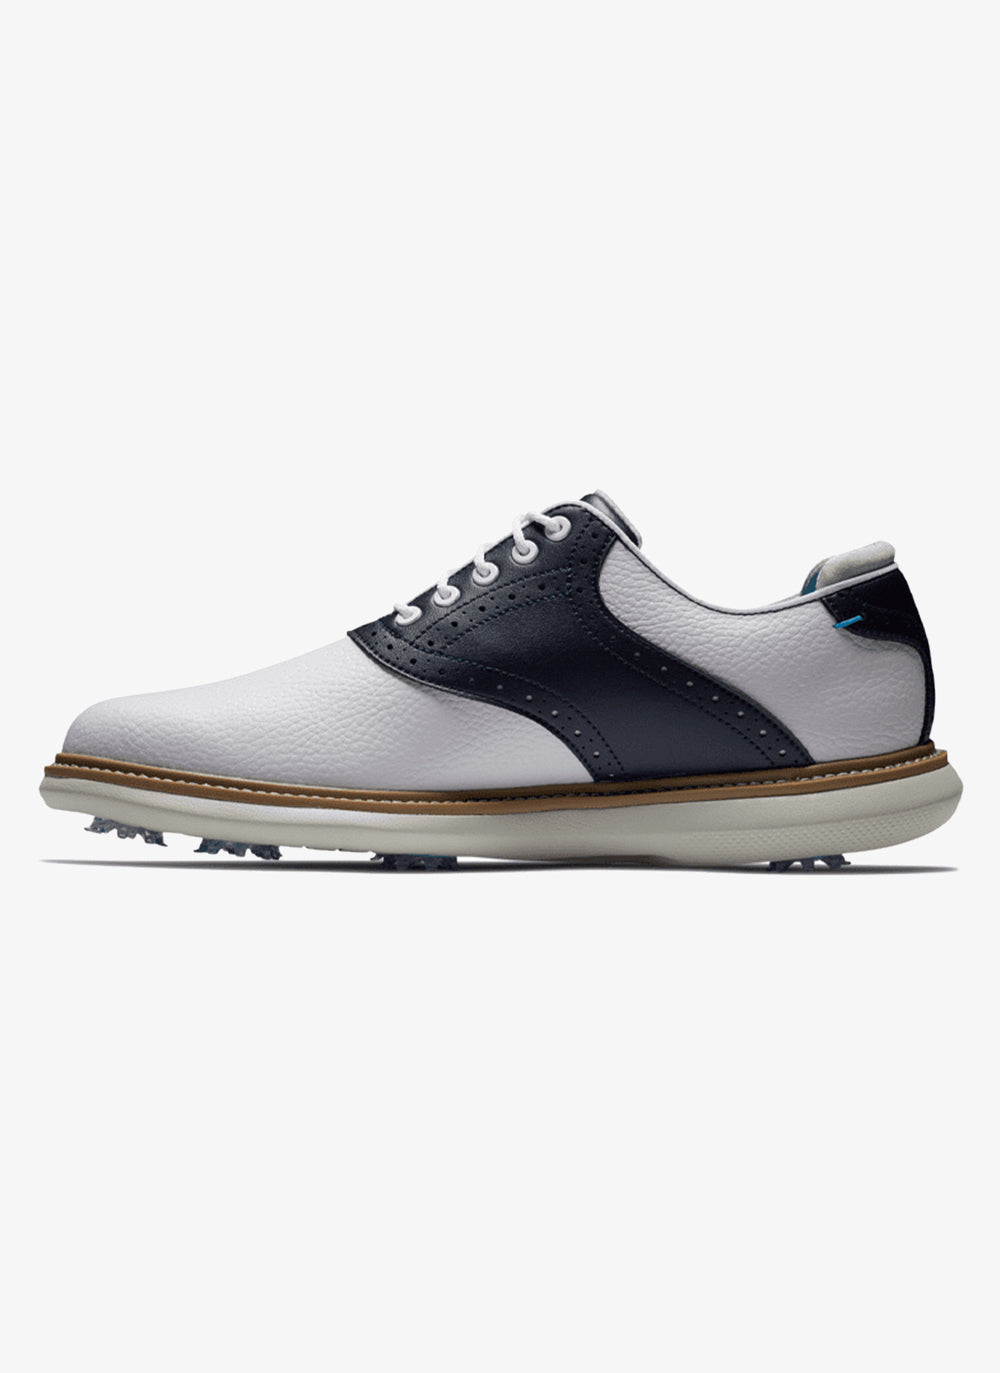 FootJoy Traditions Golf Shoes 57899 | White/Navy